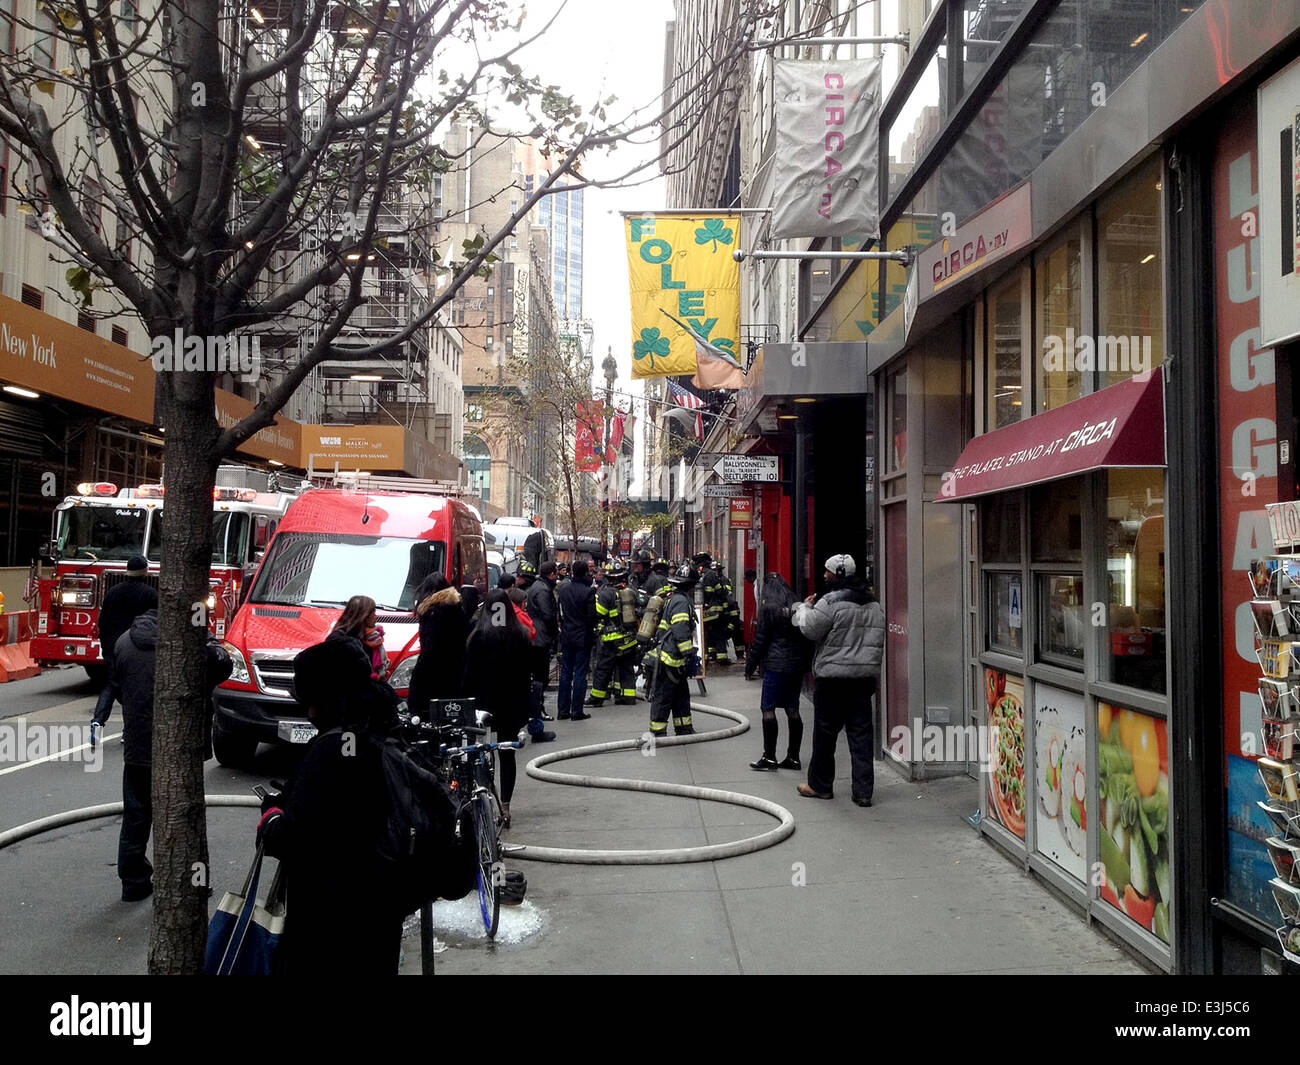 Members of the FDNY respond to a call of a small fire that broke out at Foley's NY, the famed midtown pub and restaurant across the street from the Empire State Building  Where: New York City, United States When: 26 Nov 2013 Stock Photo